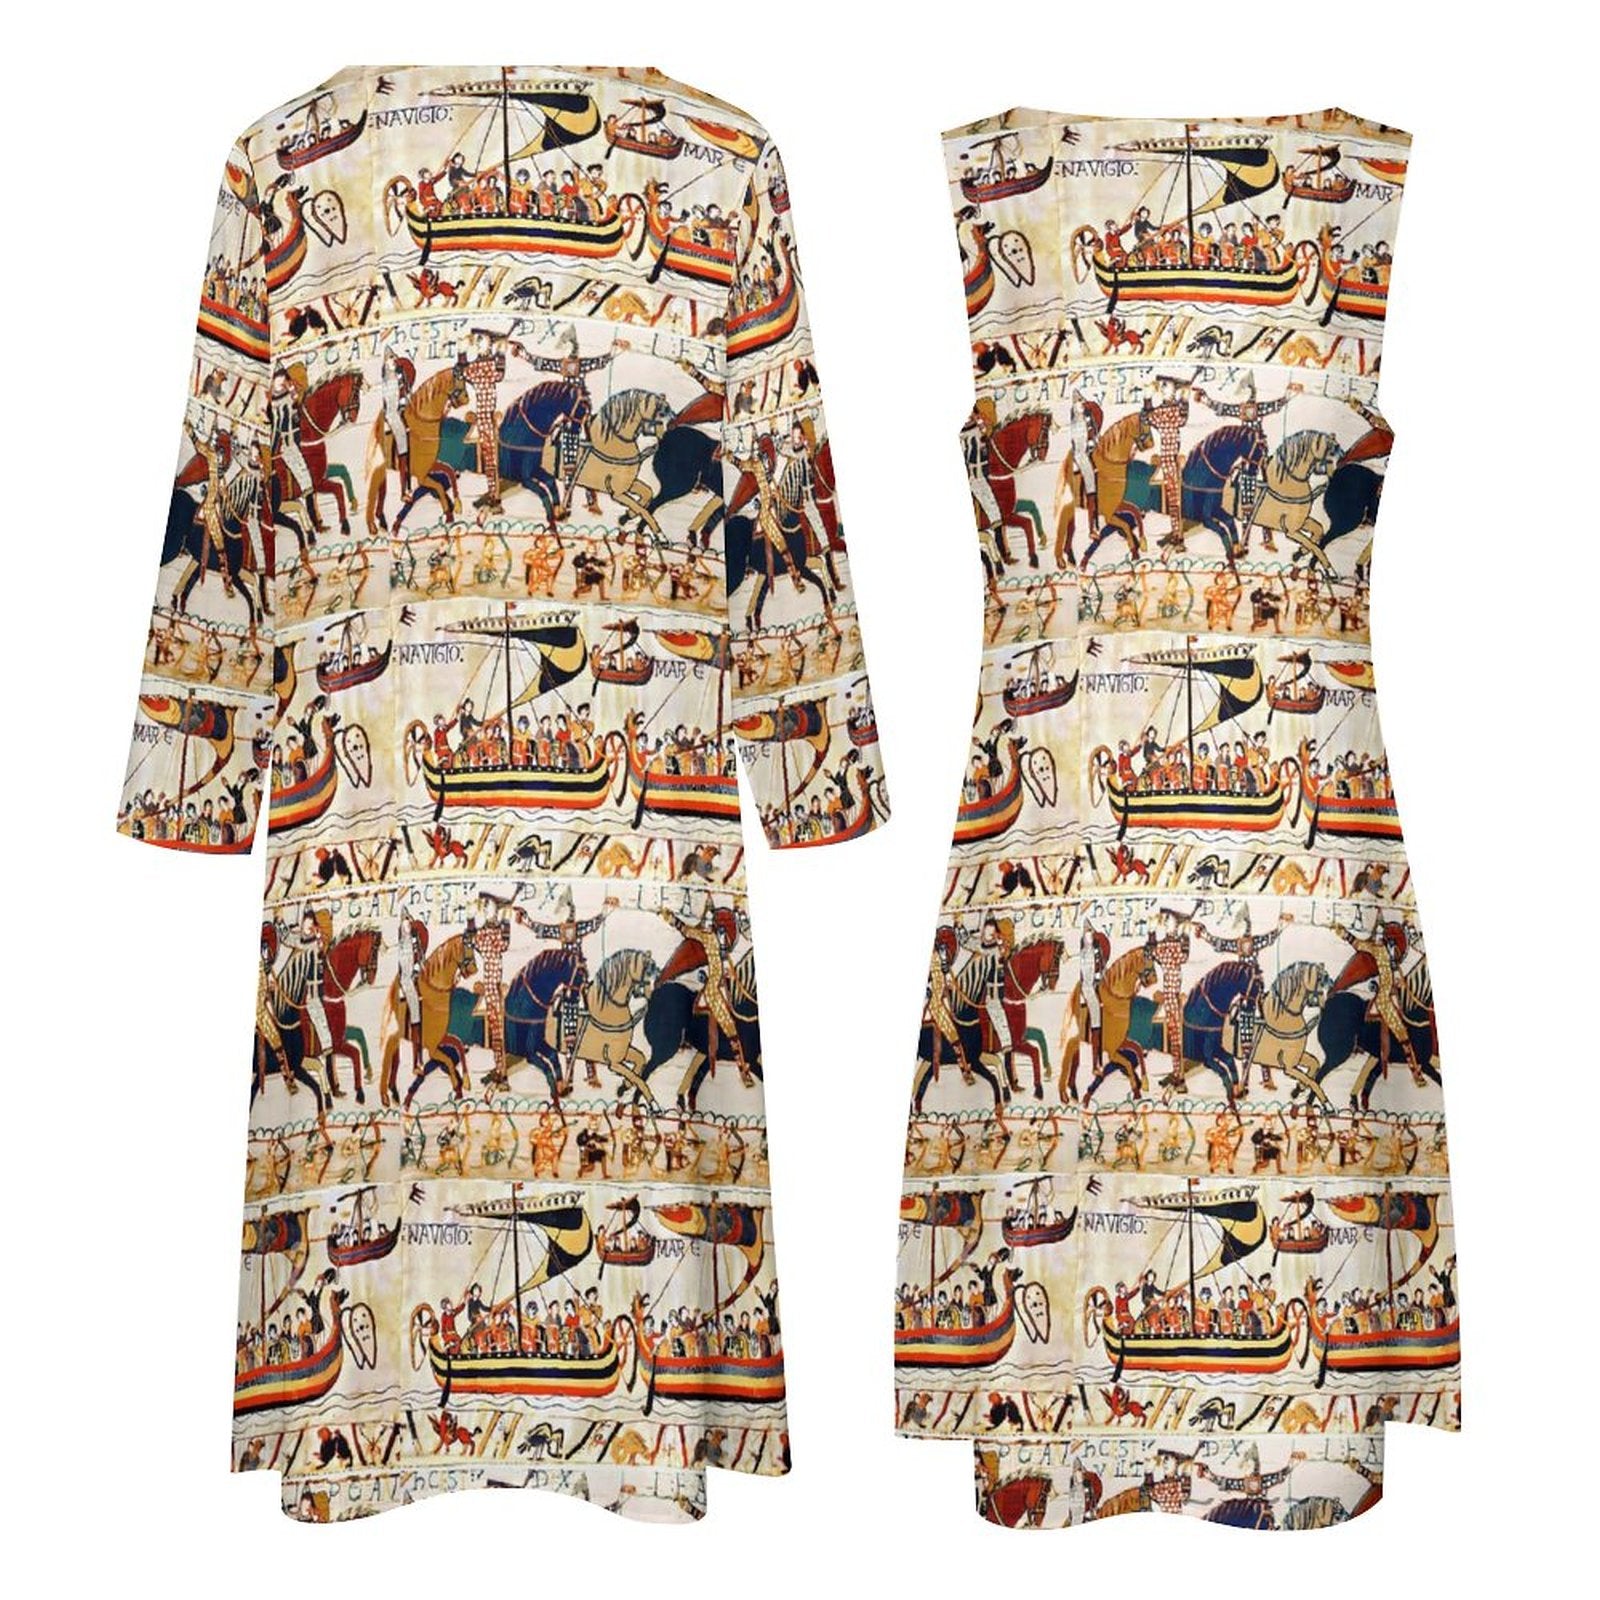 Dresses with horses on them